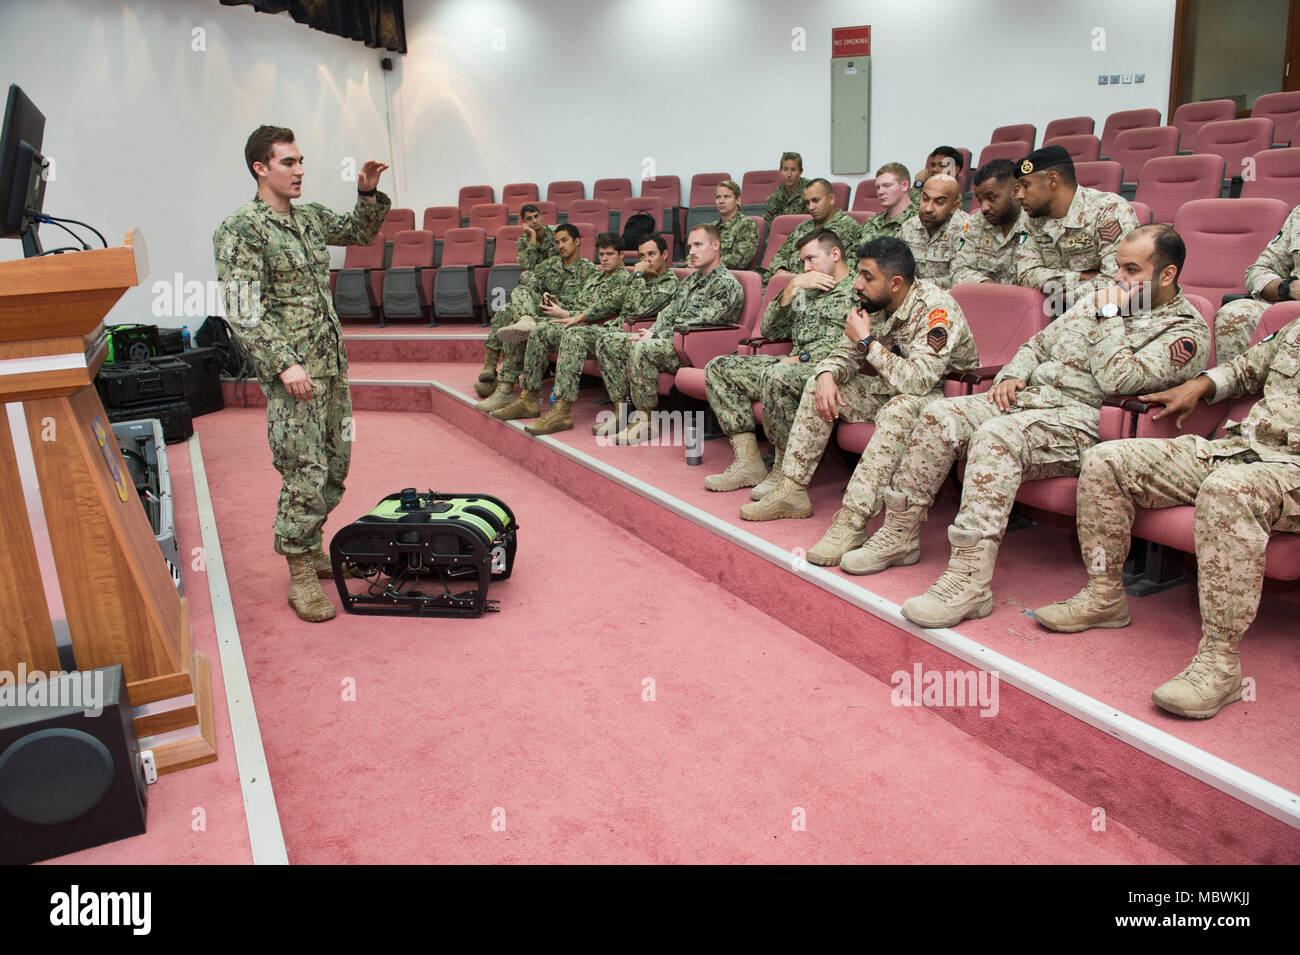 180107-N-XE158-0081 Mohammed Al-Ahmad Naval Base, KUWAIT (Jan. 7, 2018) Explosive Ordnance Disposal Technician 1st Class Kyle Hall, assigned to Commander, Task Group 56.1, explains the capabilities of the a remotely operated vehicle to Kuwait Naval Force explosive ordnance disposal technicians during a training evolution as part of exercise Eager Response 18. Eager Response 18 is a bilateral explosive ordnance disposal military exercise between the State of Kuwait and the United States. The exercise fortifies military-to-military relationships between the Kuwait Naval Force and U.S. Navy, adva Stock Photo